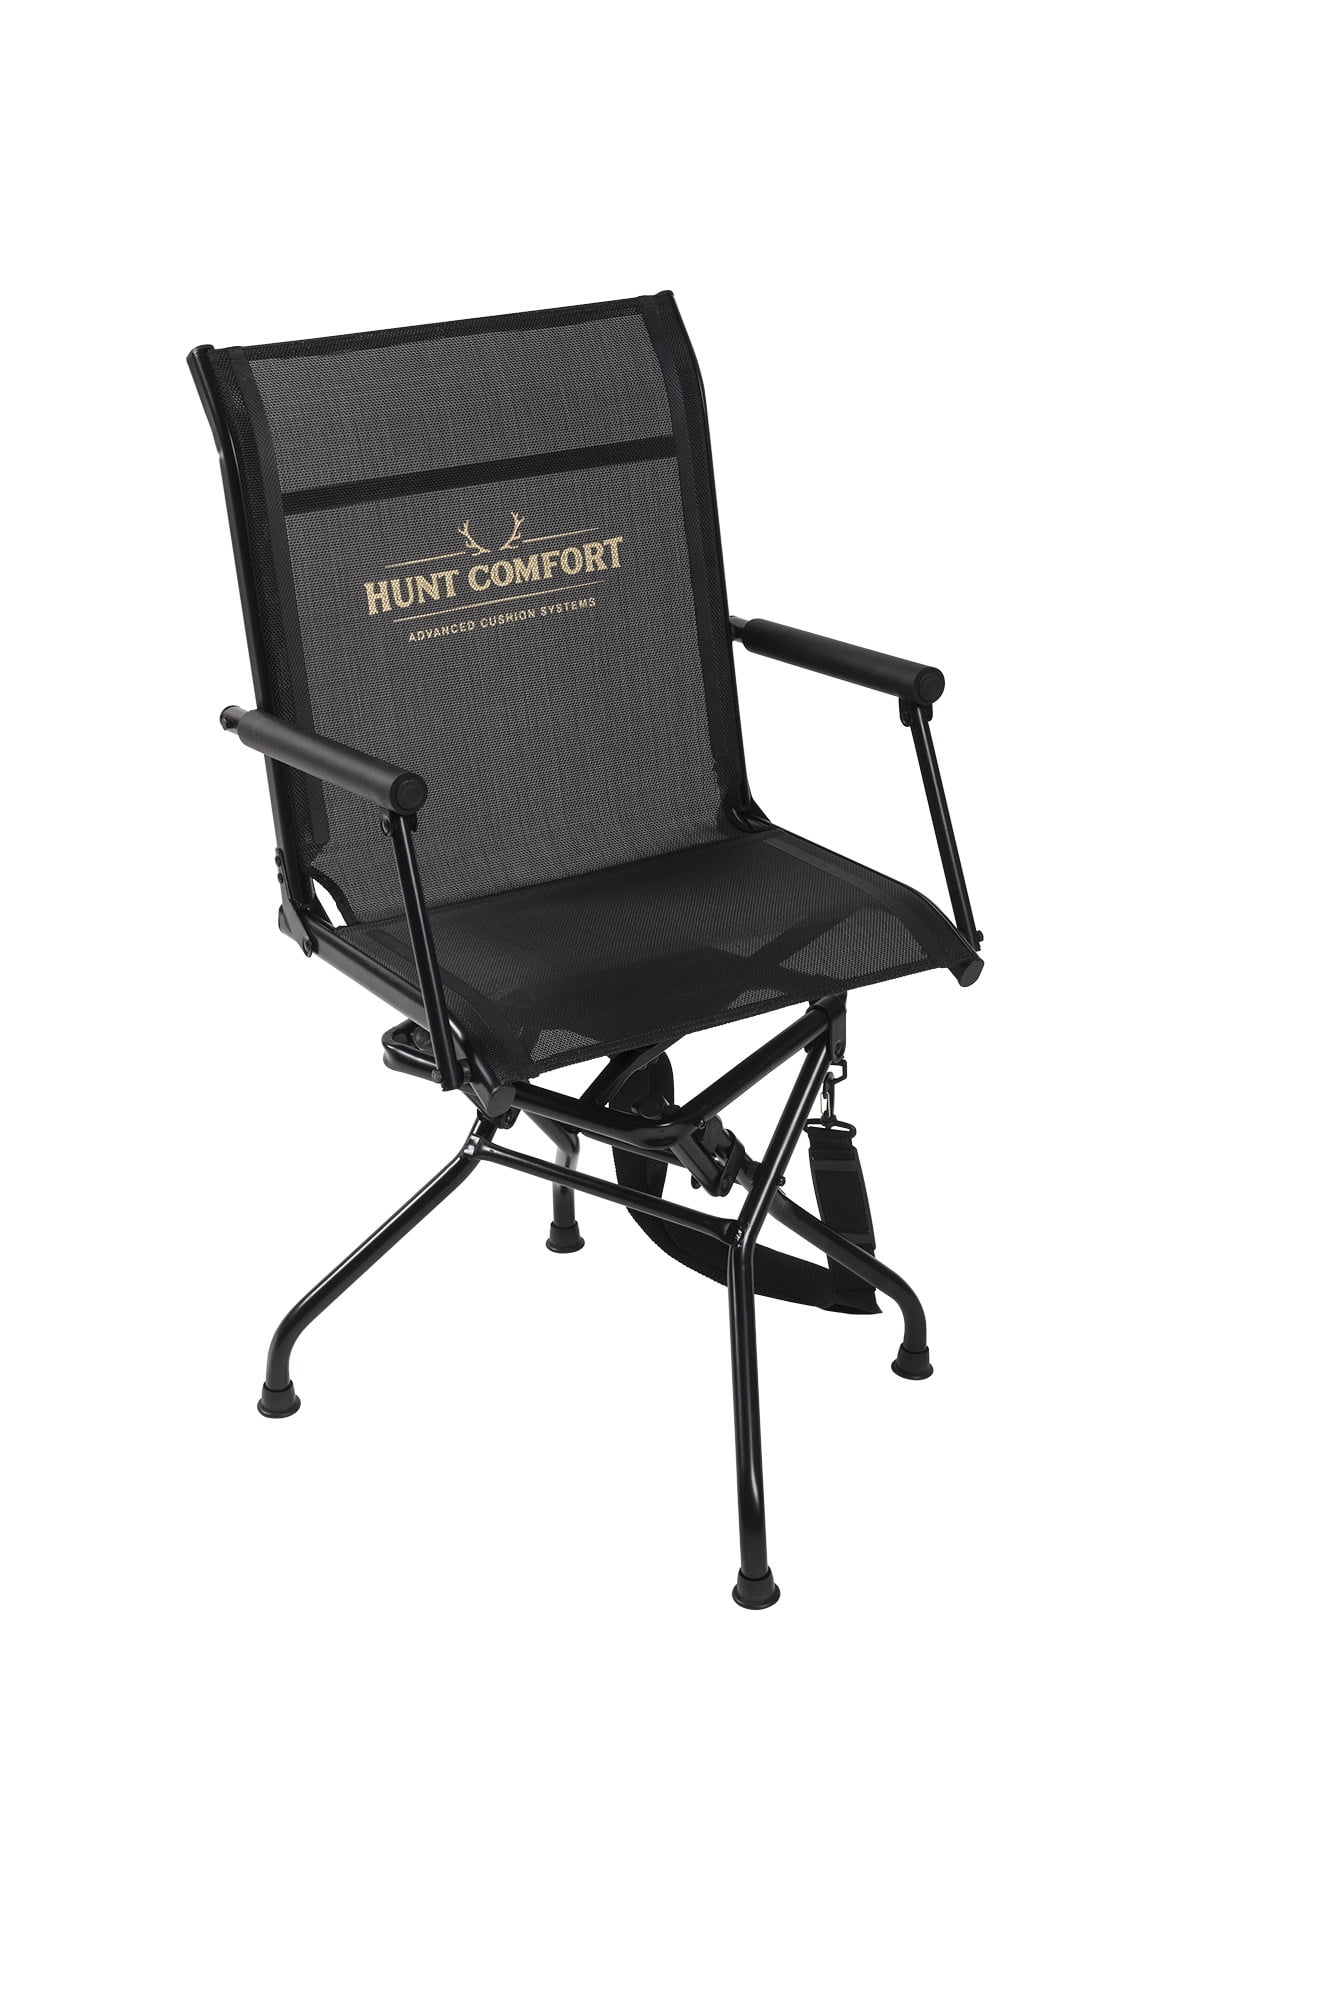 BLACK SWIVEL COMFORT CHAIR Padded Over-Sized Quiet Folding Deer Hunting Turkey 